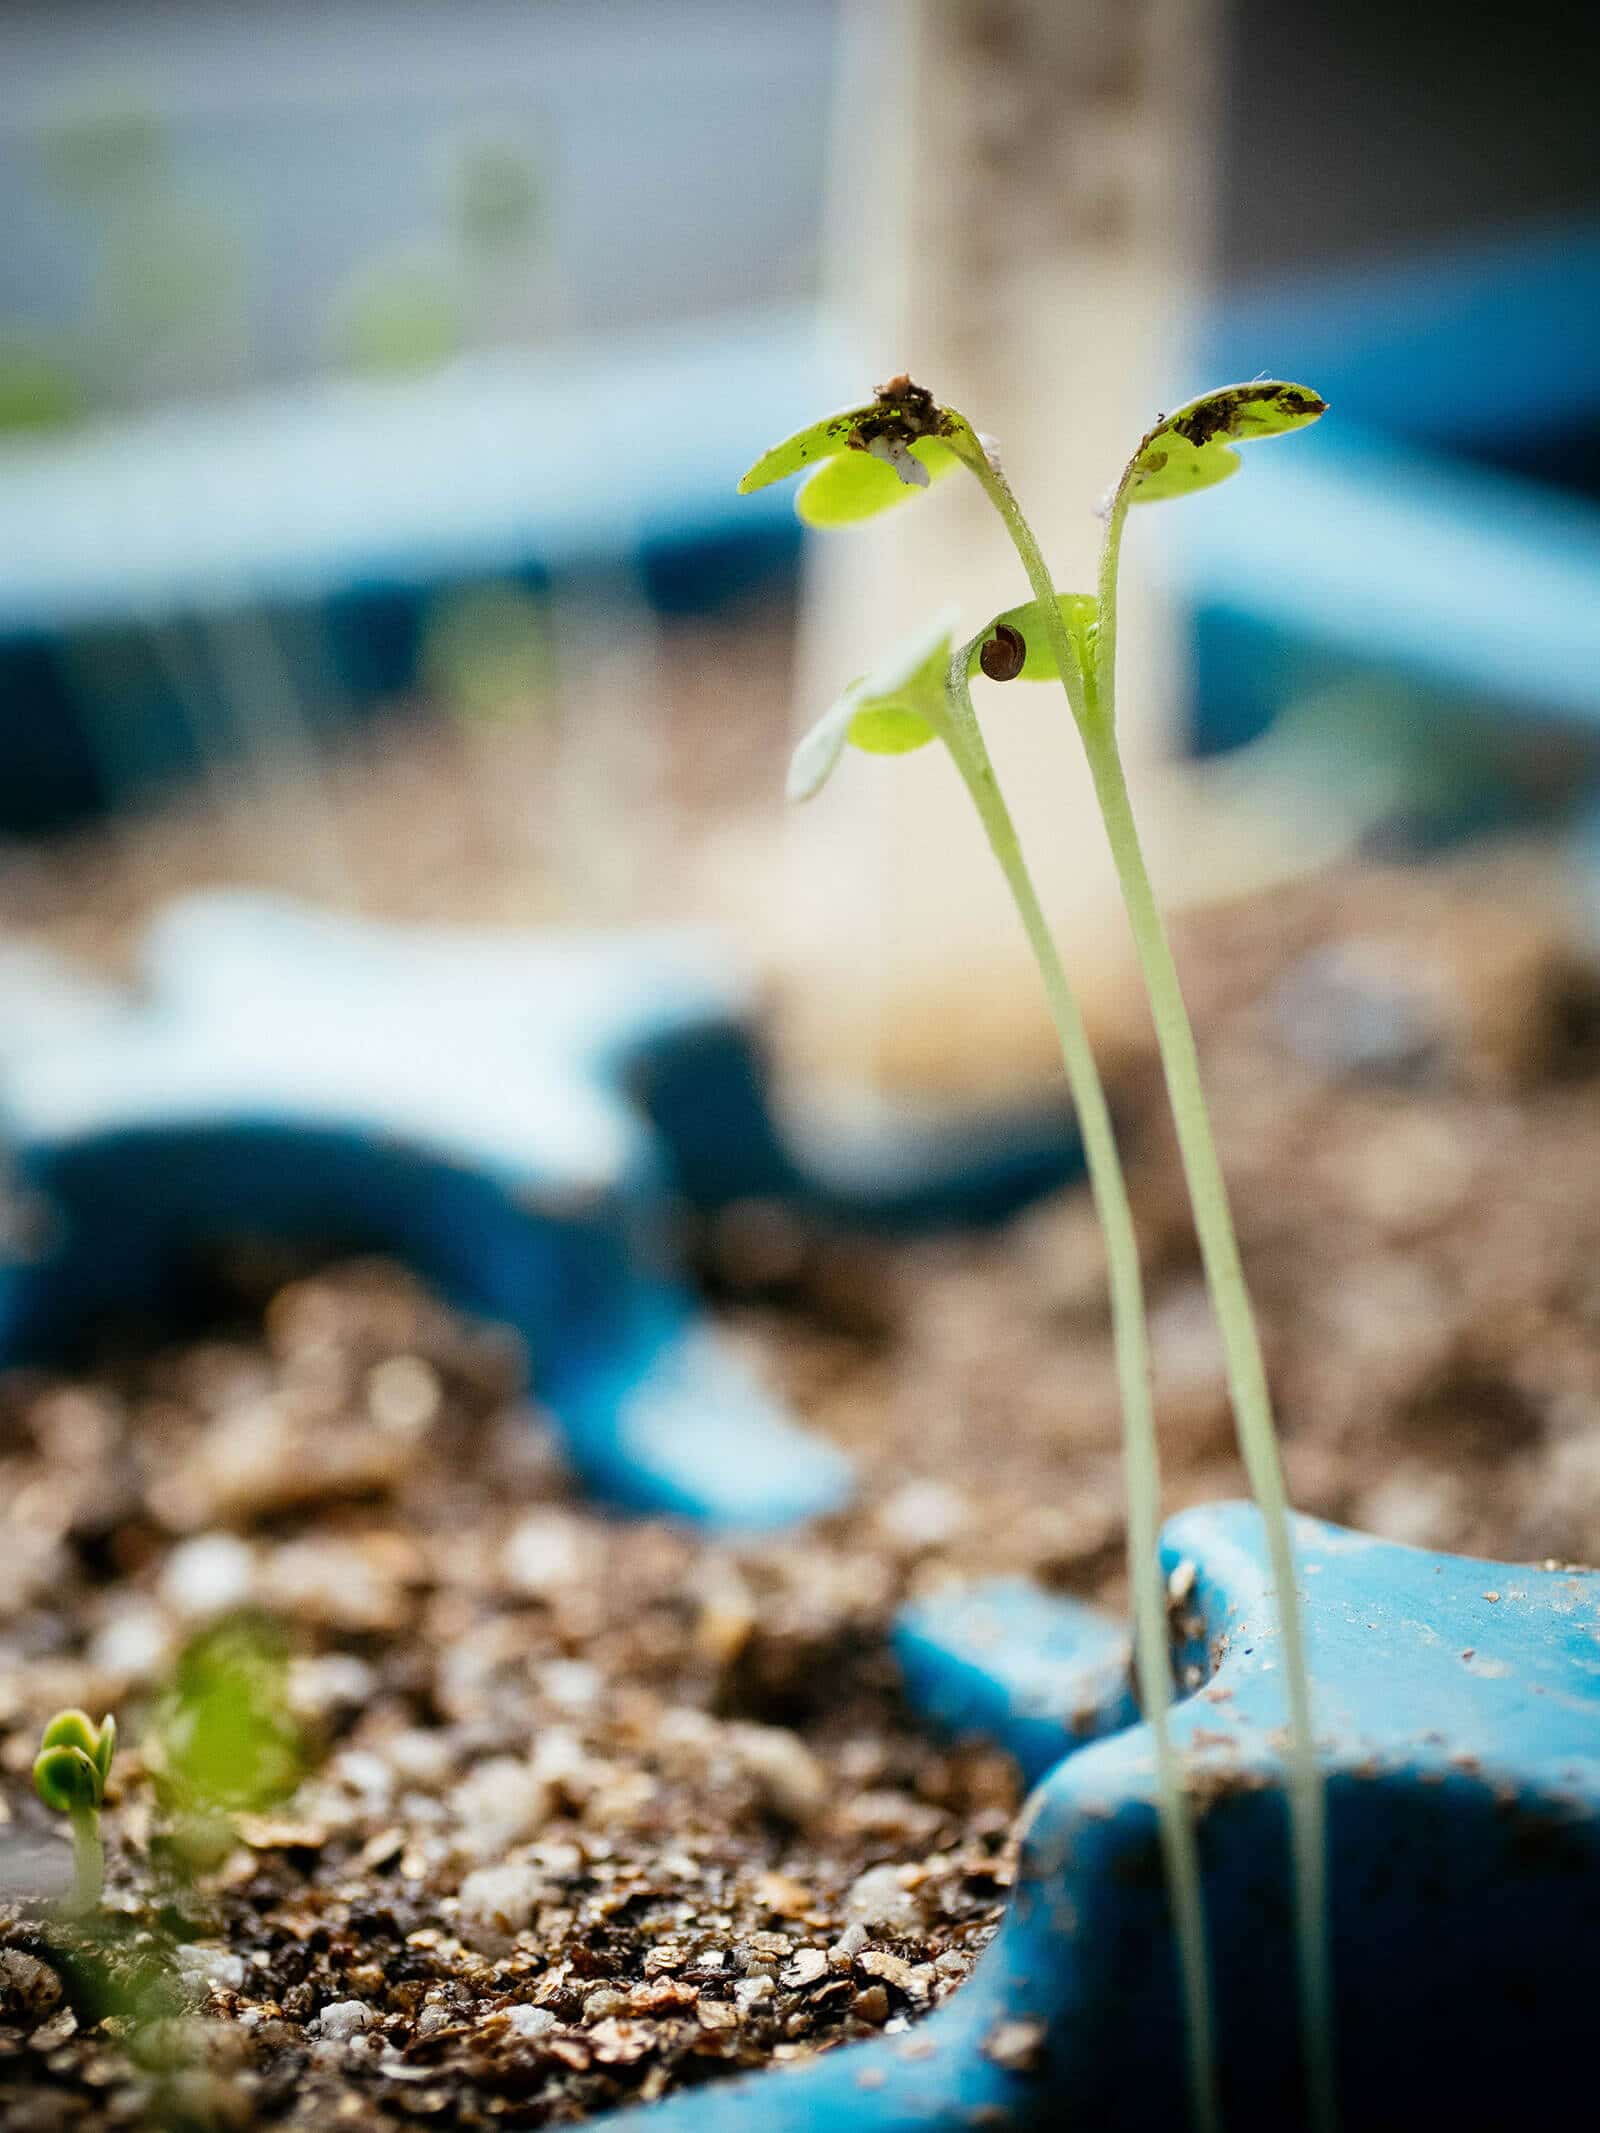 Fix leggy seedlings by giving them artificial light to support healthy growth